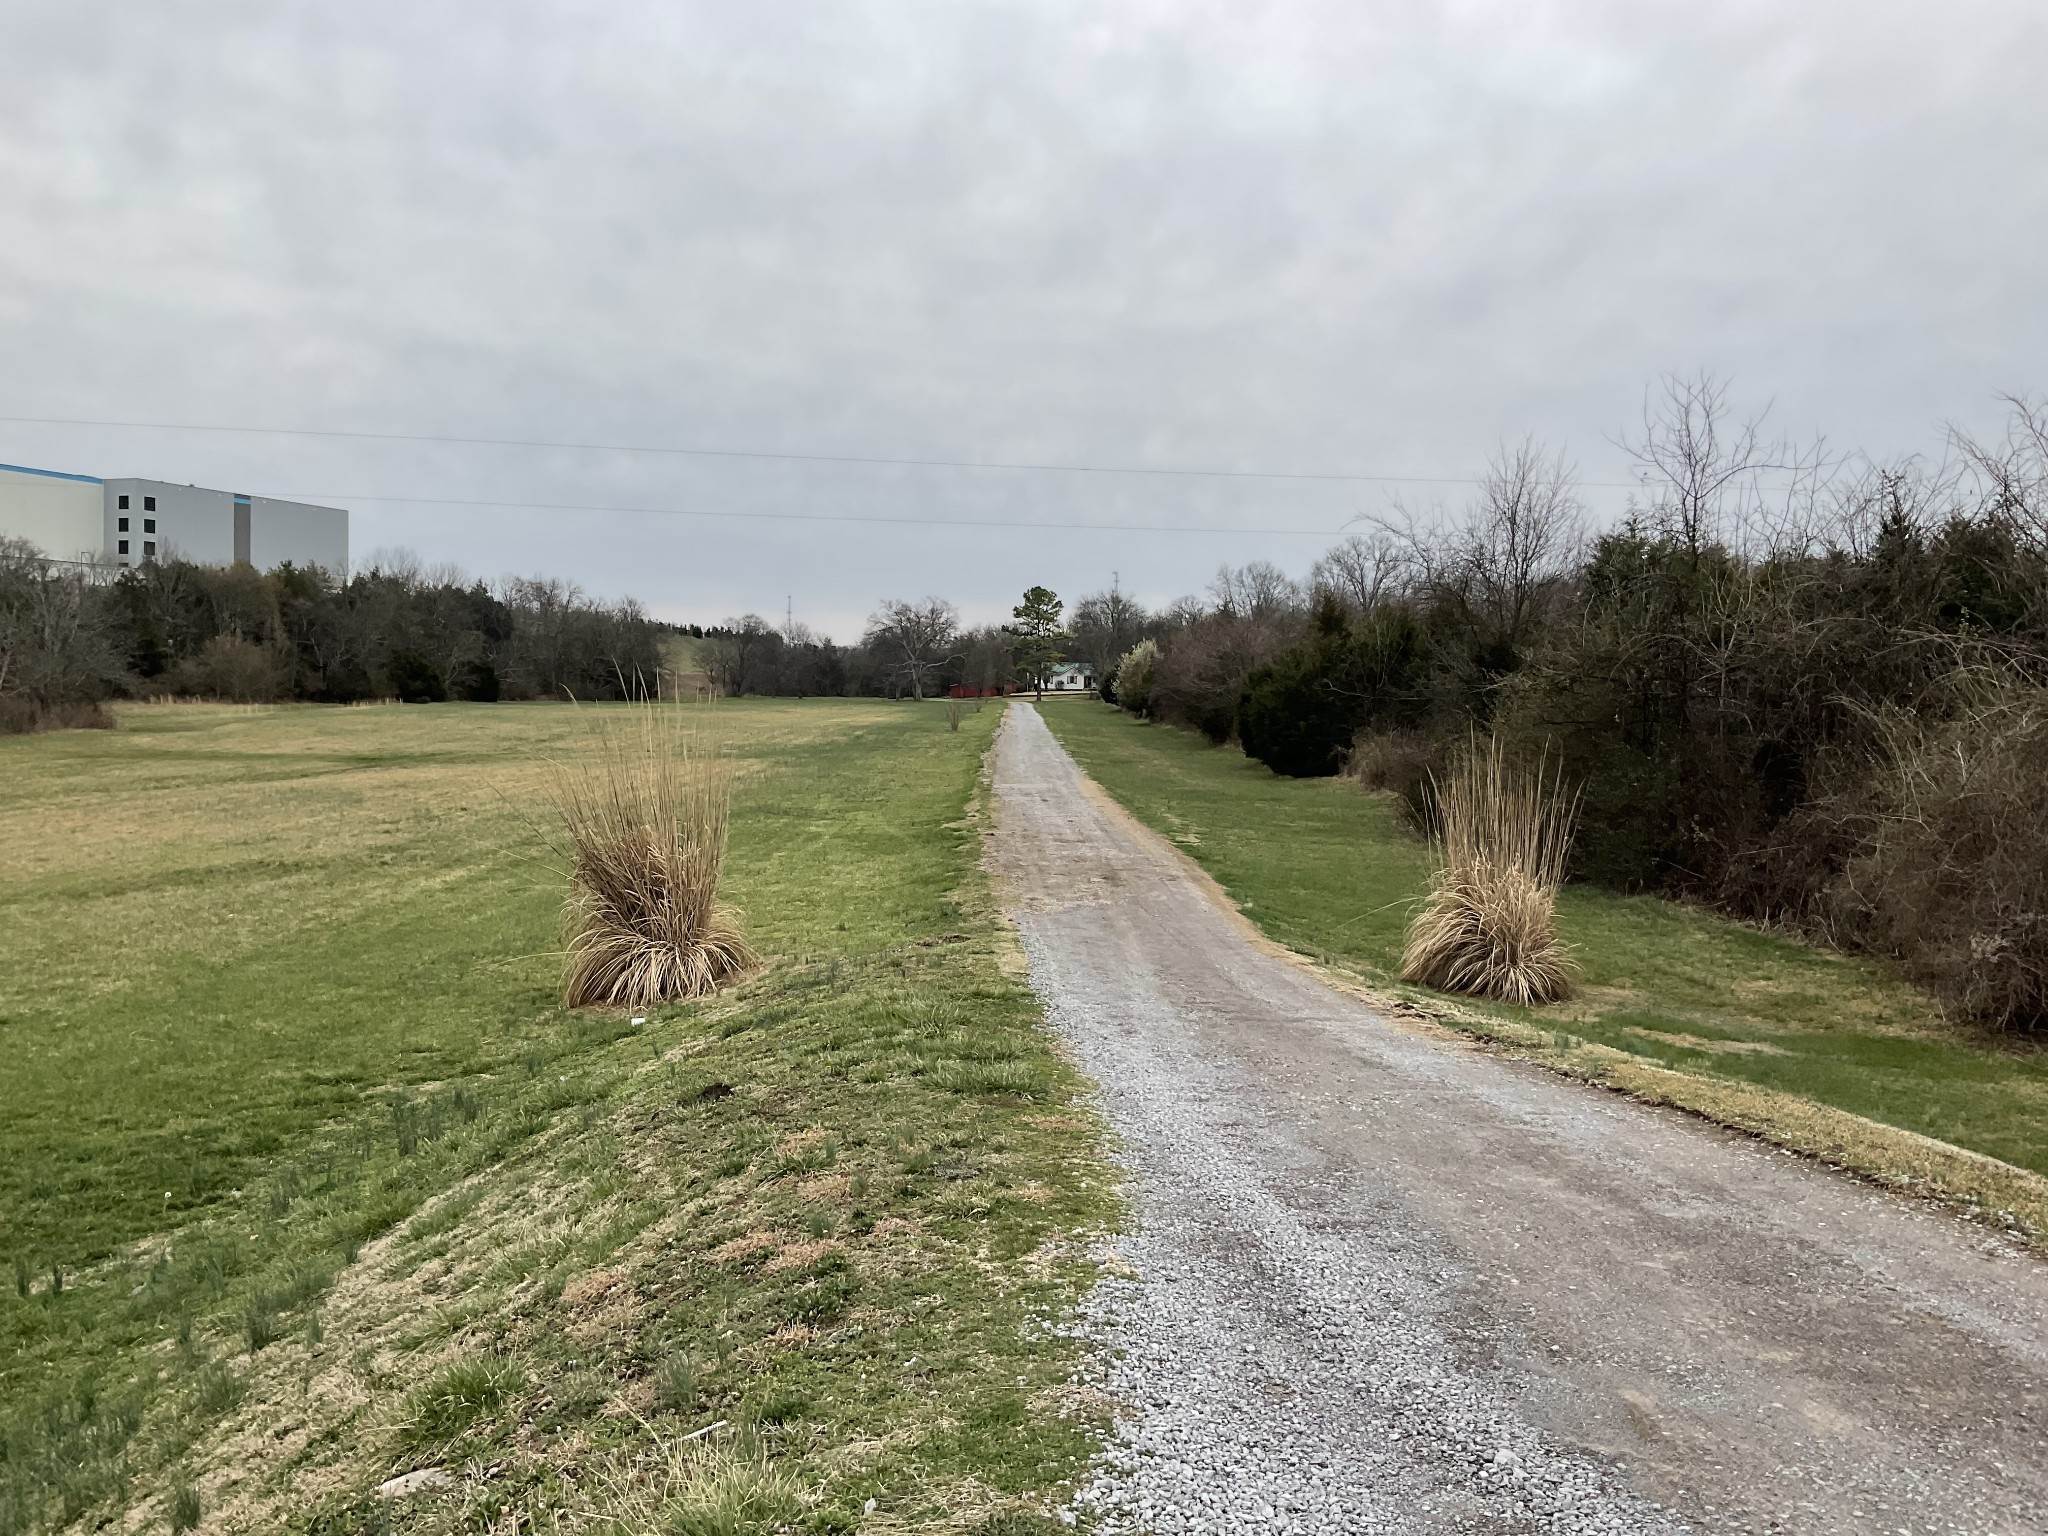 Property for Sale at 2106 E Division Street Mount Juliet, Tennessee 37122 United States